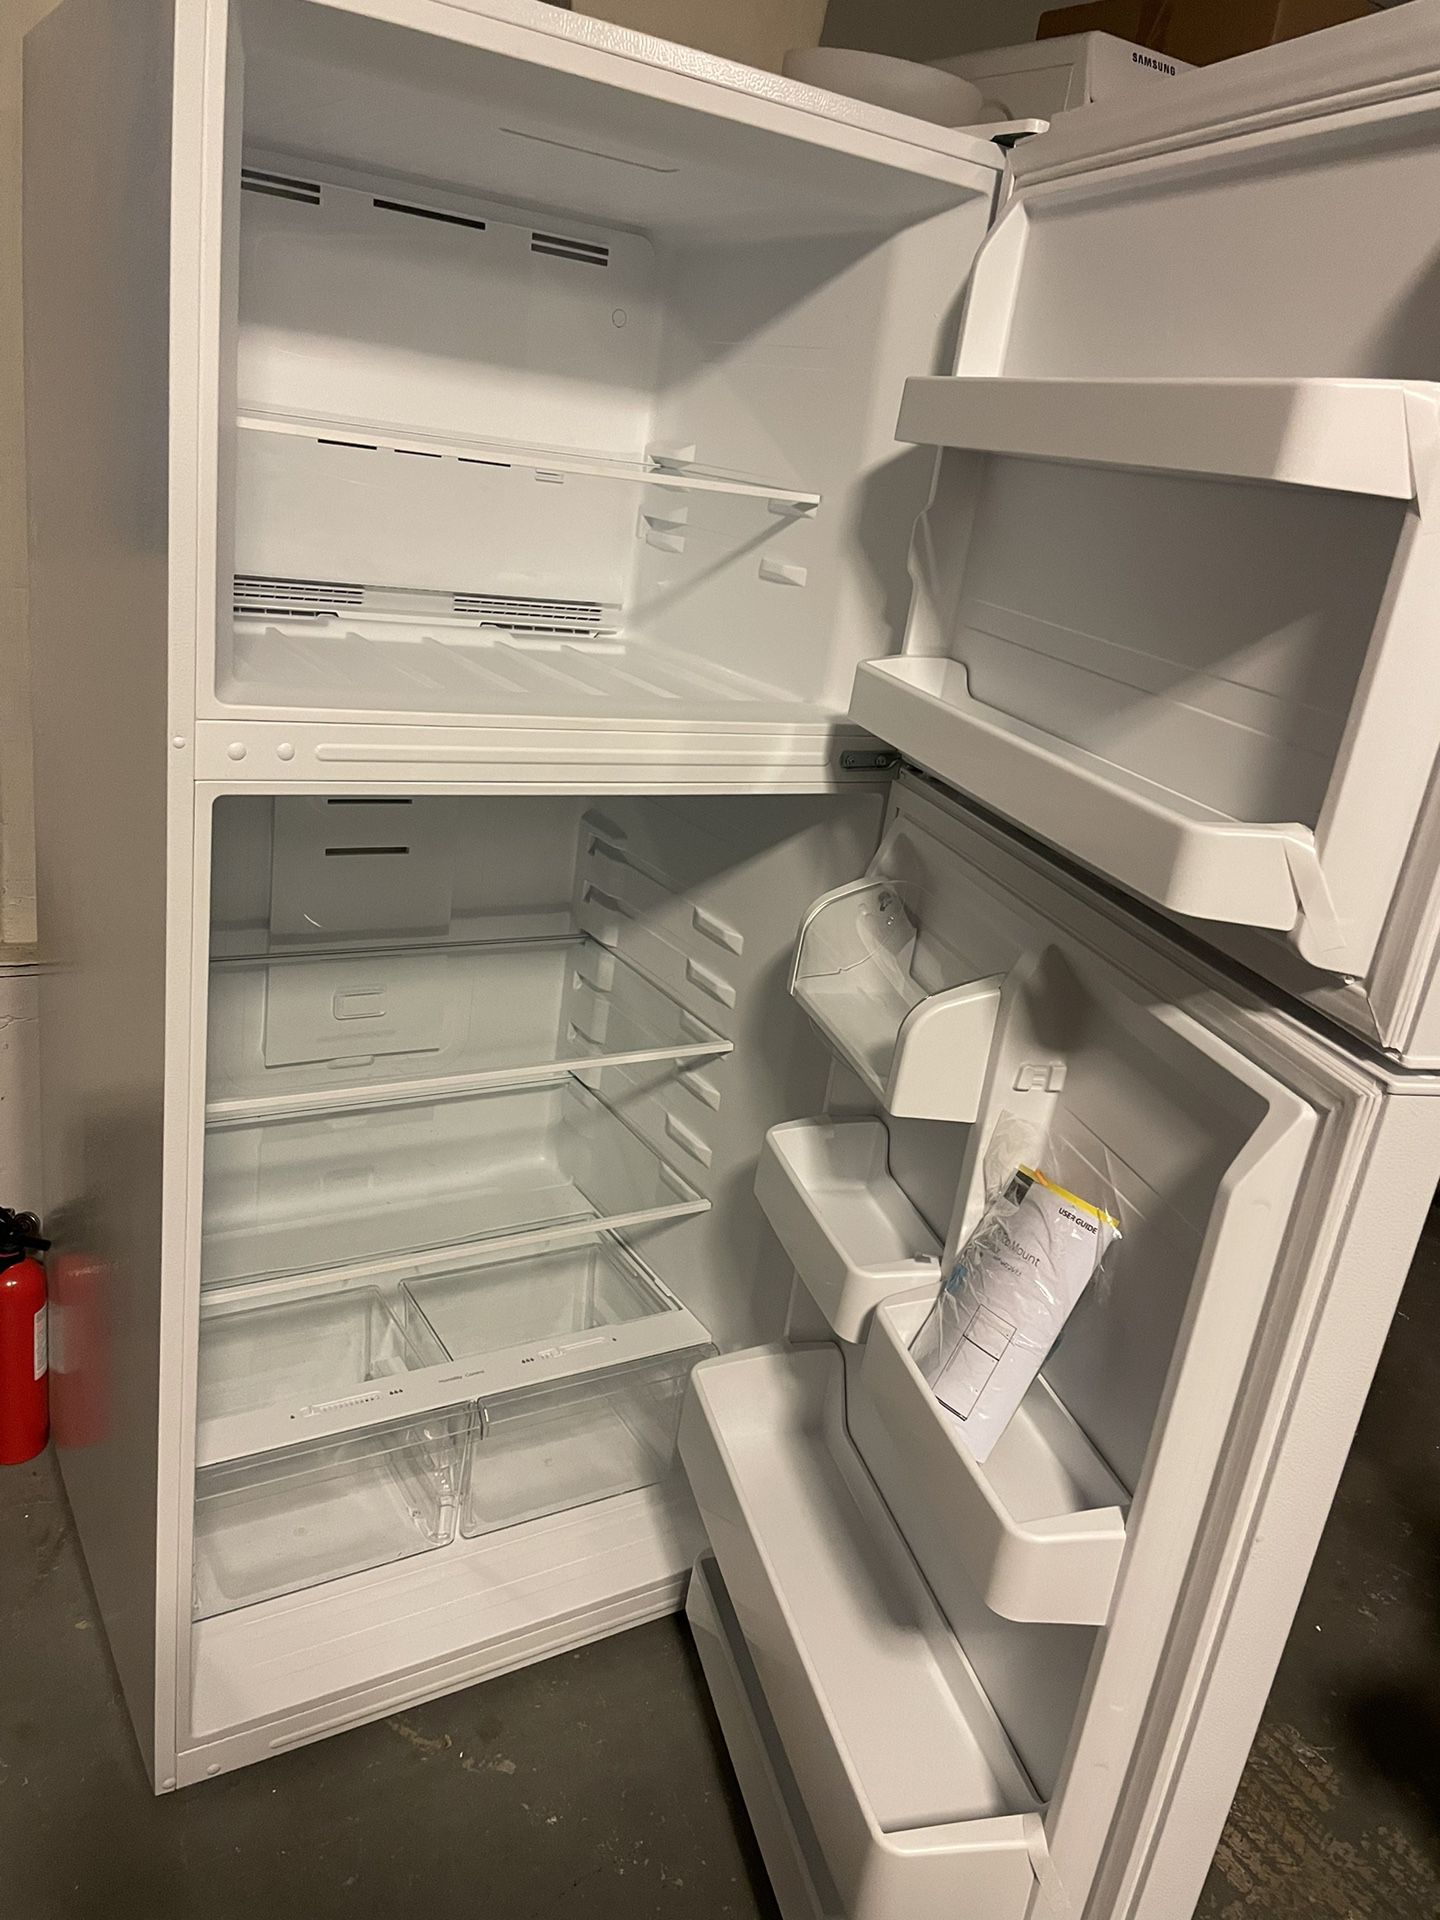 NEW-18 Cut Refrigerator-never Used, Removed From Box Askin $400. 